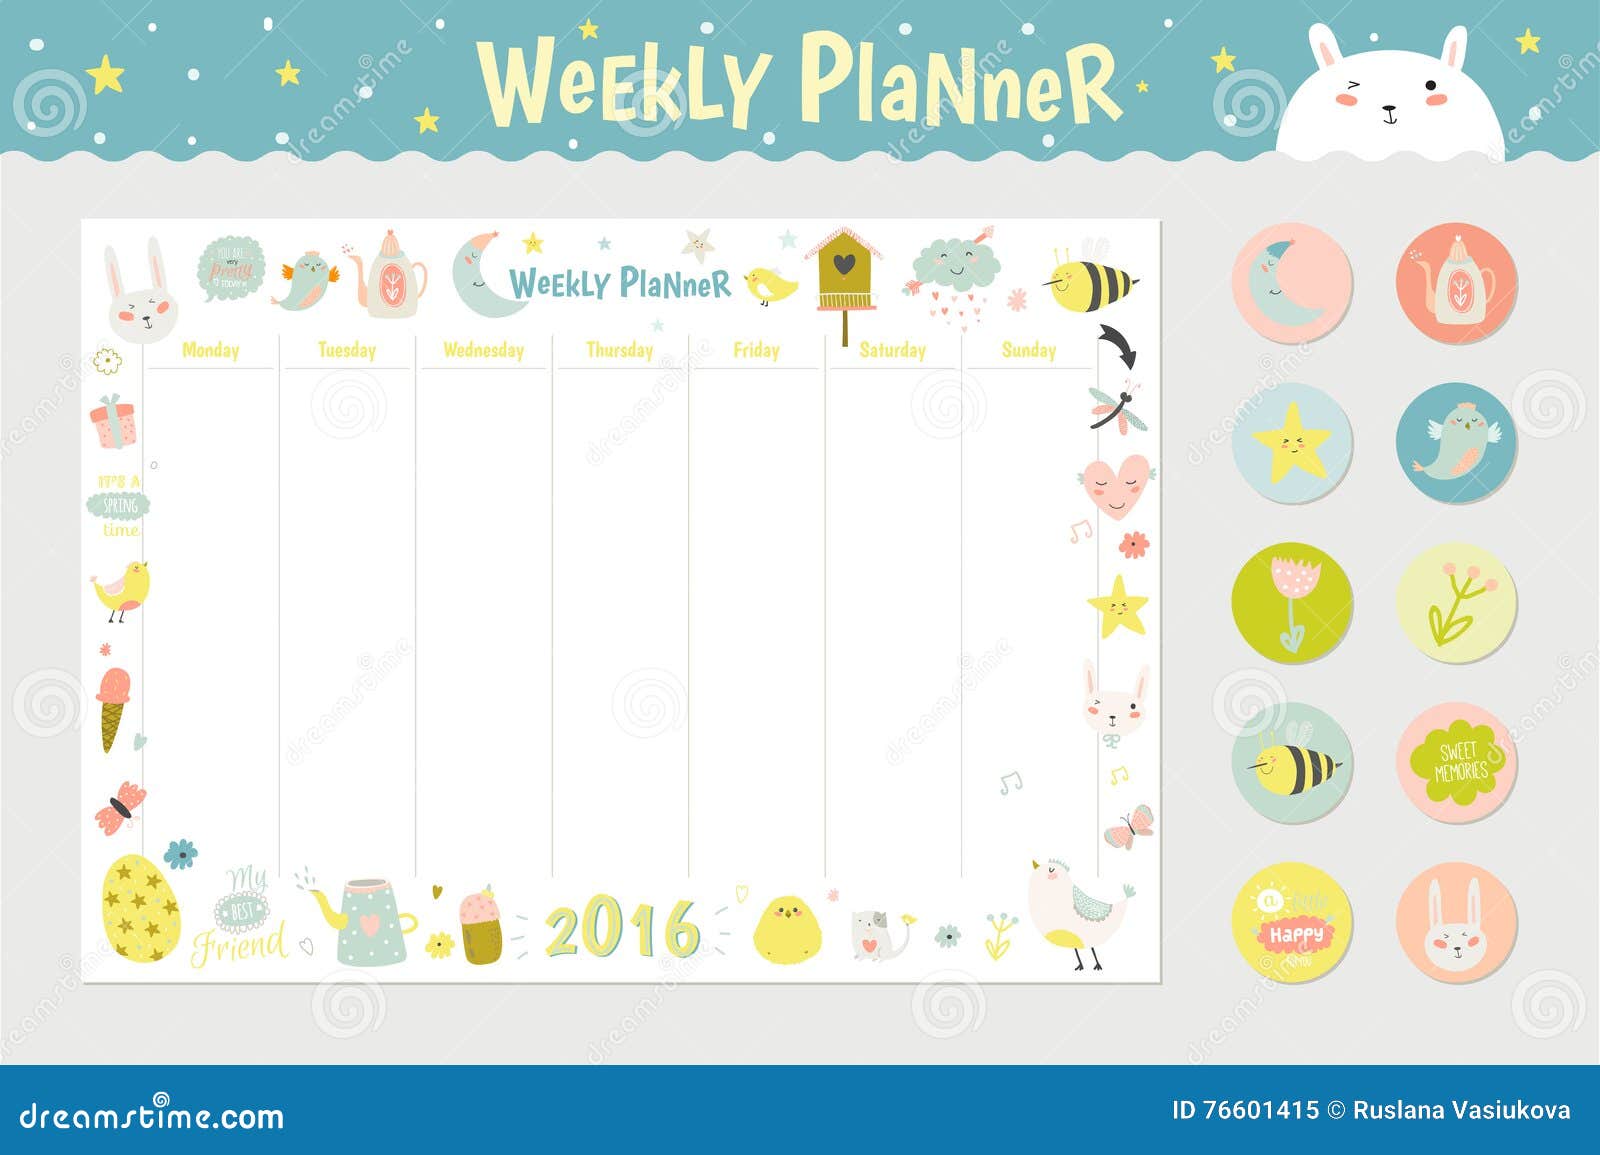 Planner Template 2016 from thumbs.dreamstime.com